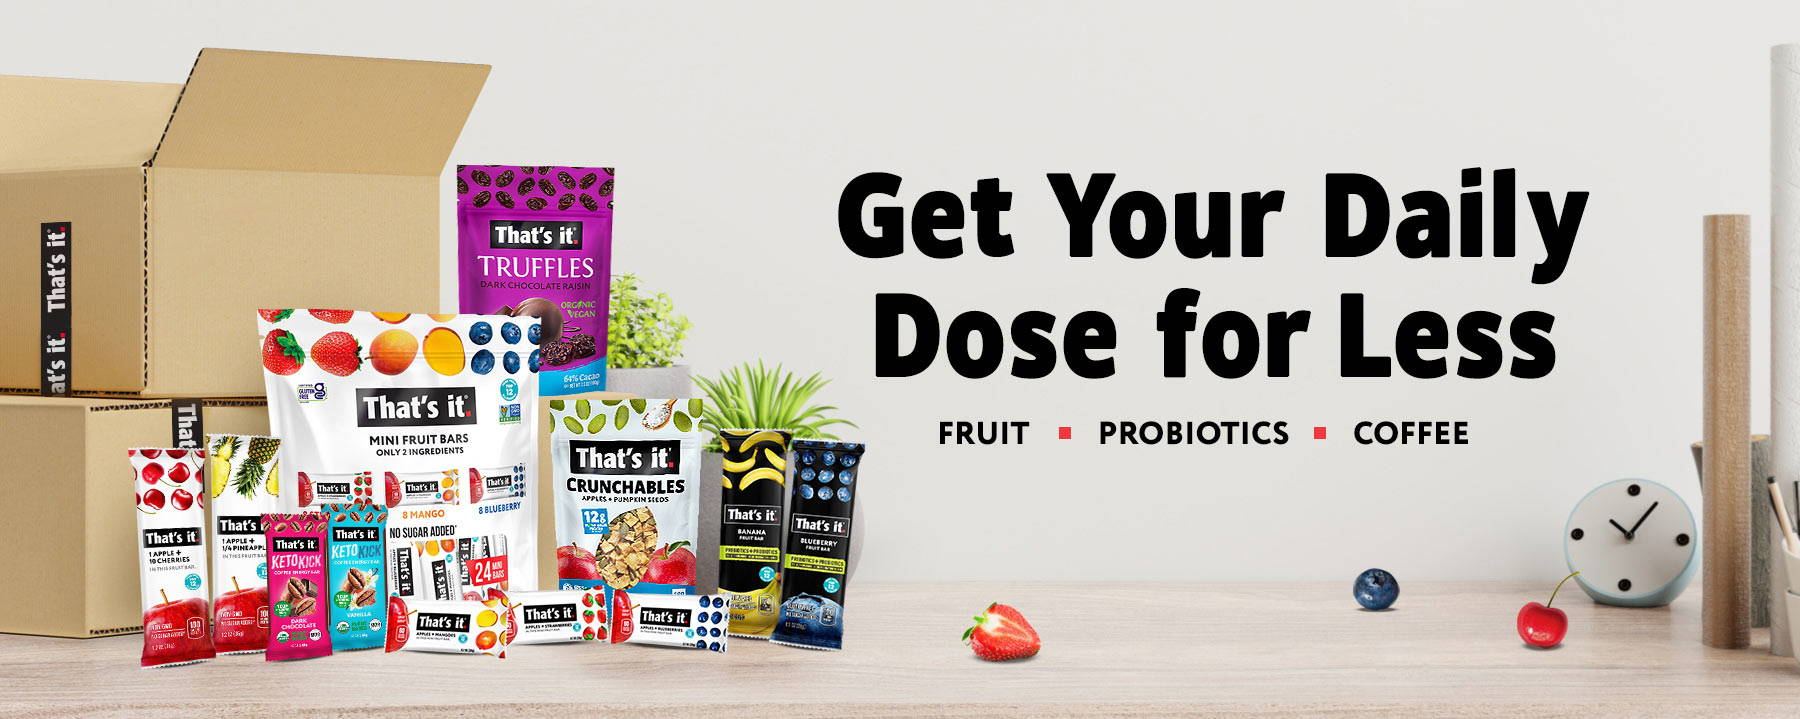 Get Your Daily Dose for Less - Fruit, Probiotic, Coffee